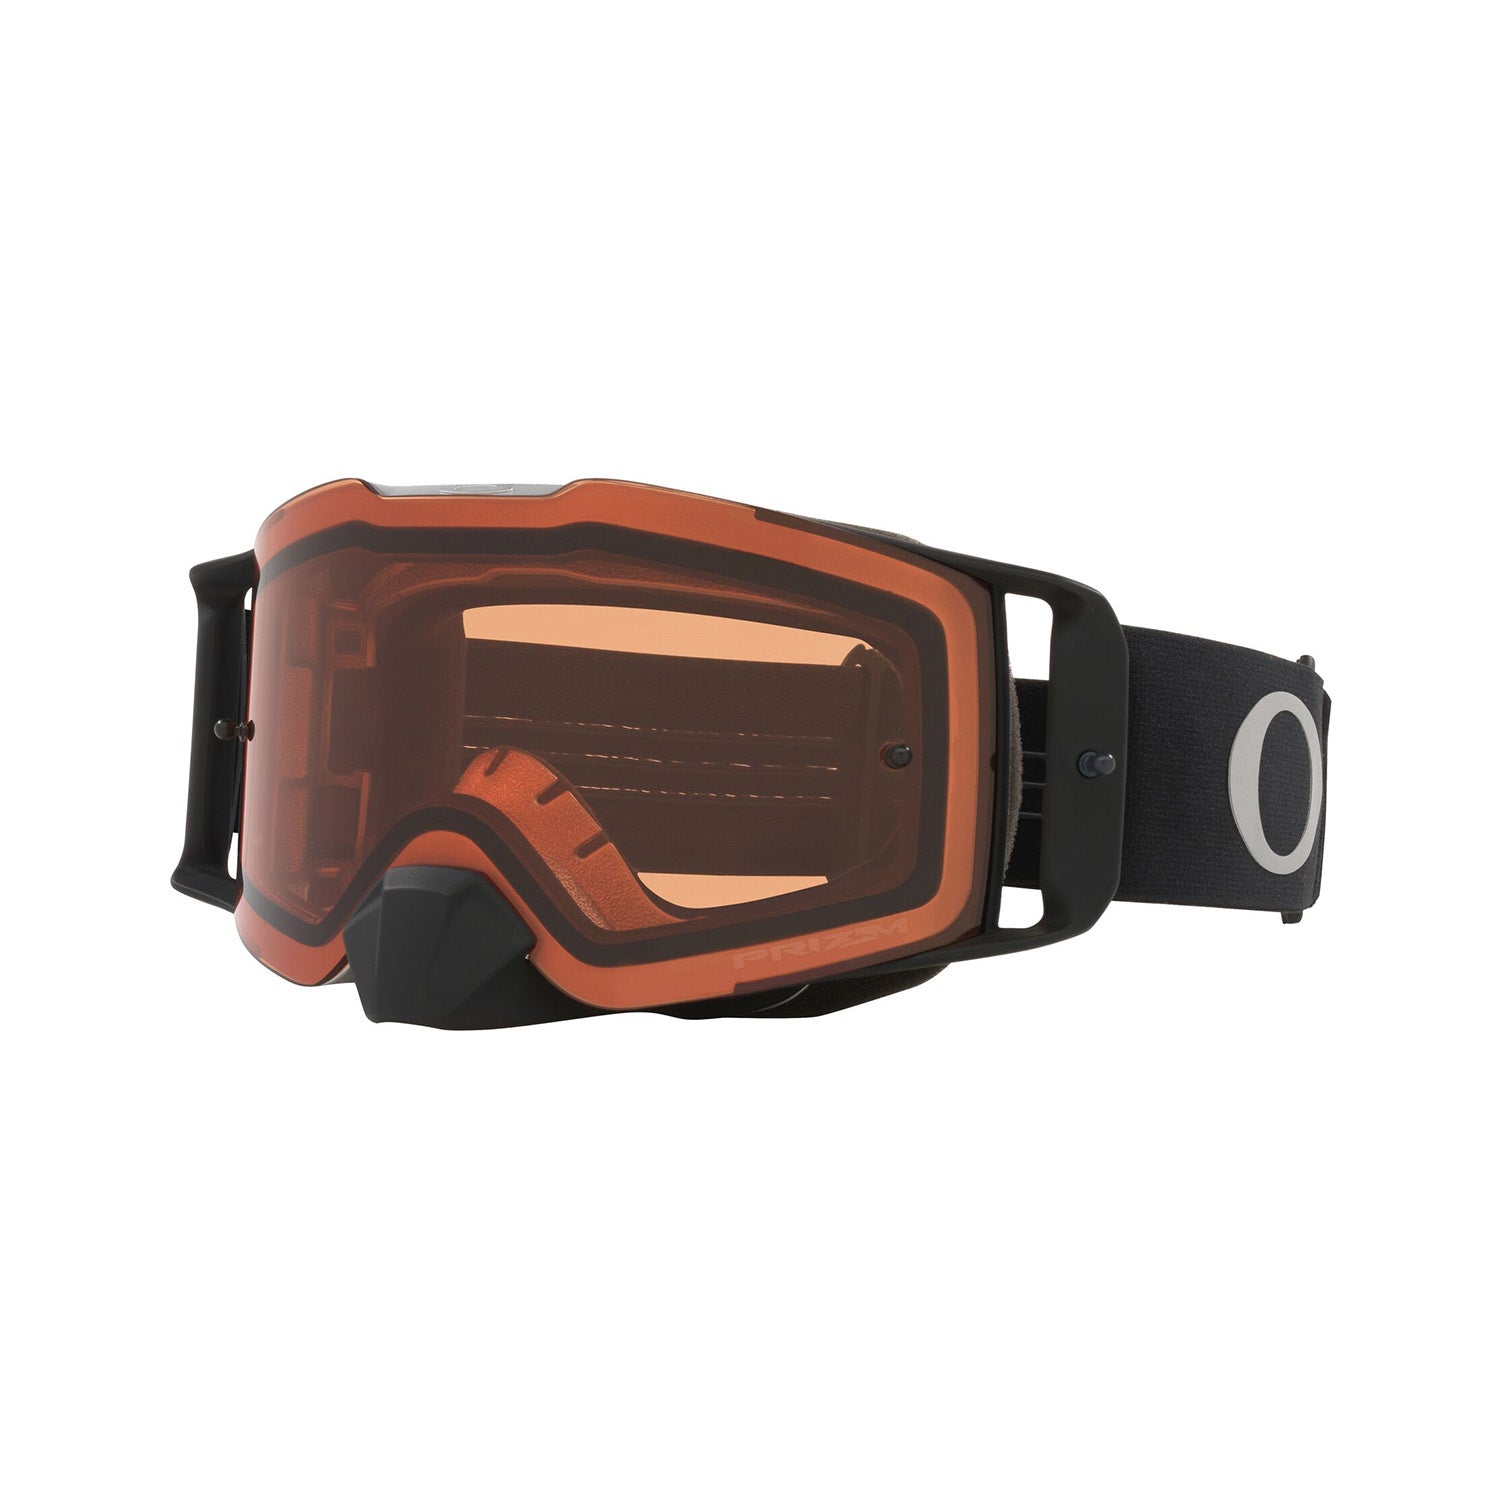 Oakley Front Line MX Goggles in Tuff Blocks Gunmetal with Prizm Bronze Lens on white background